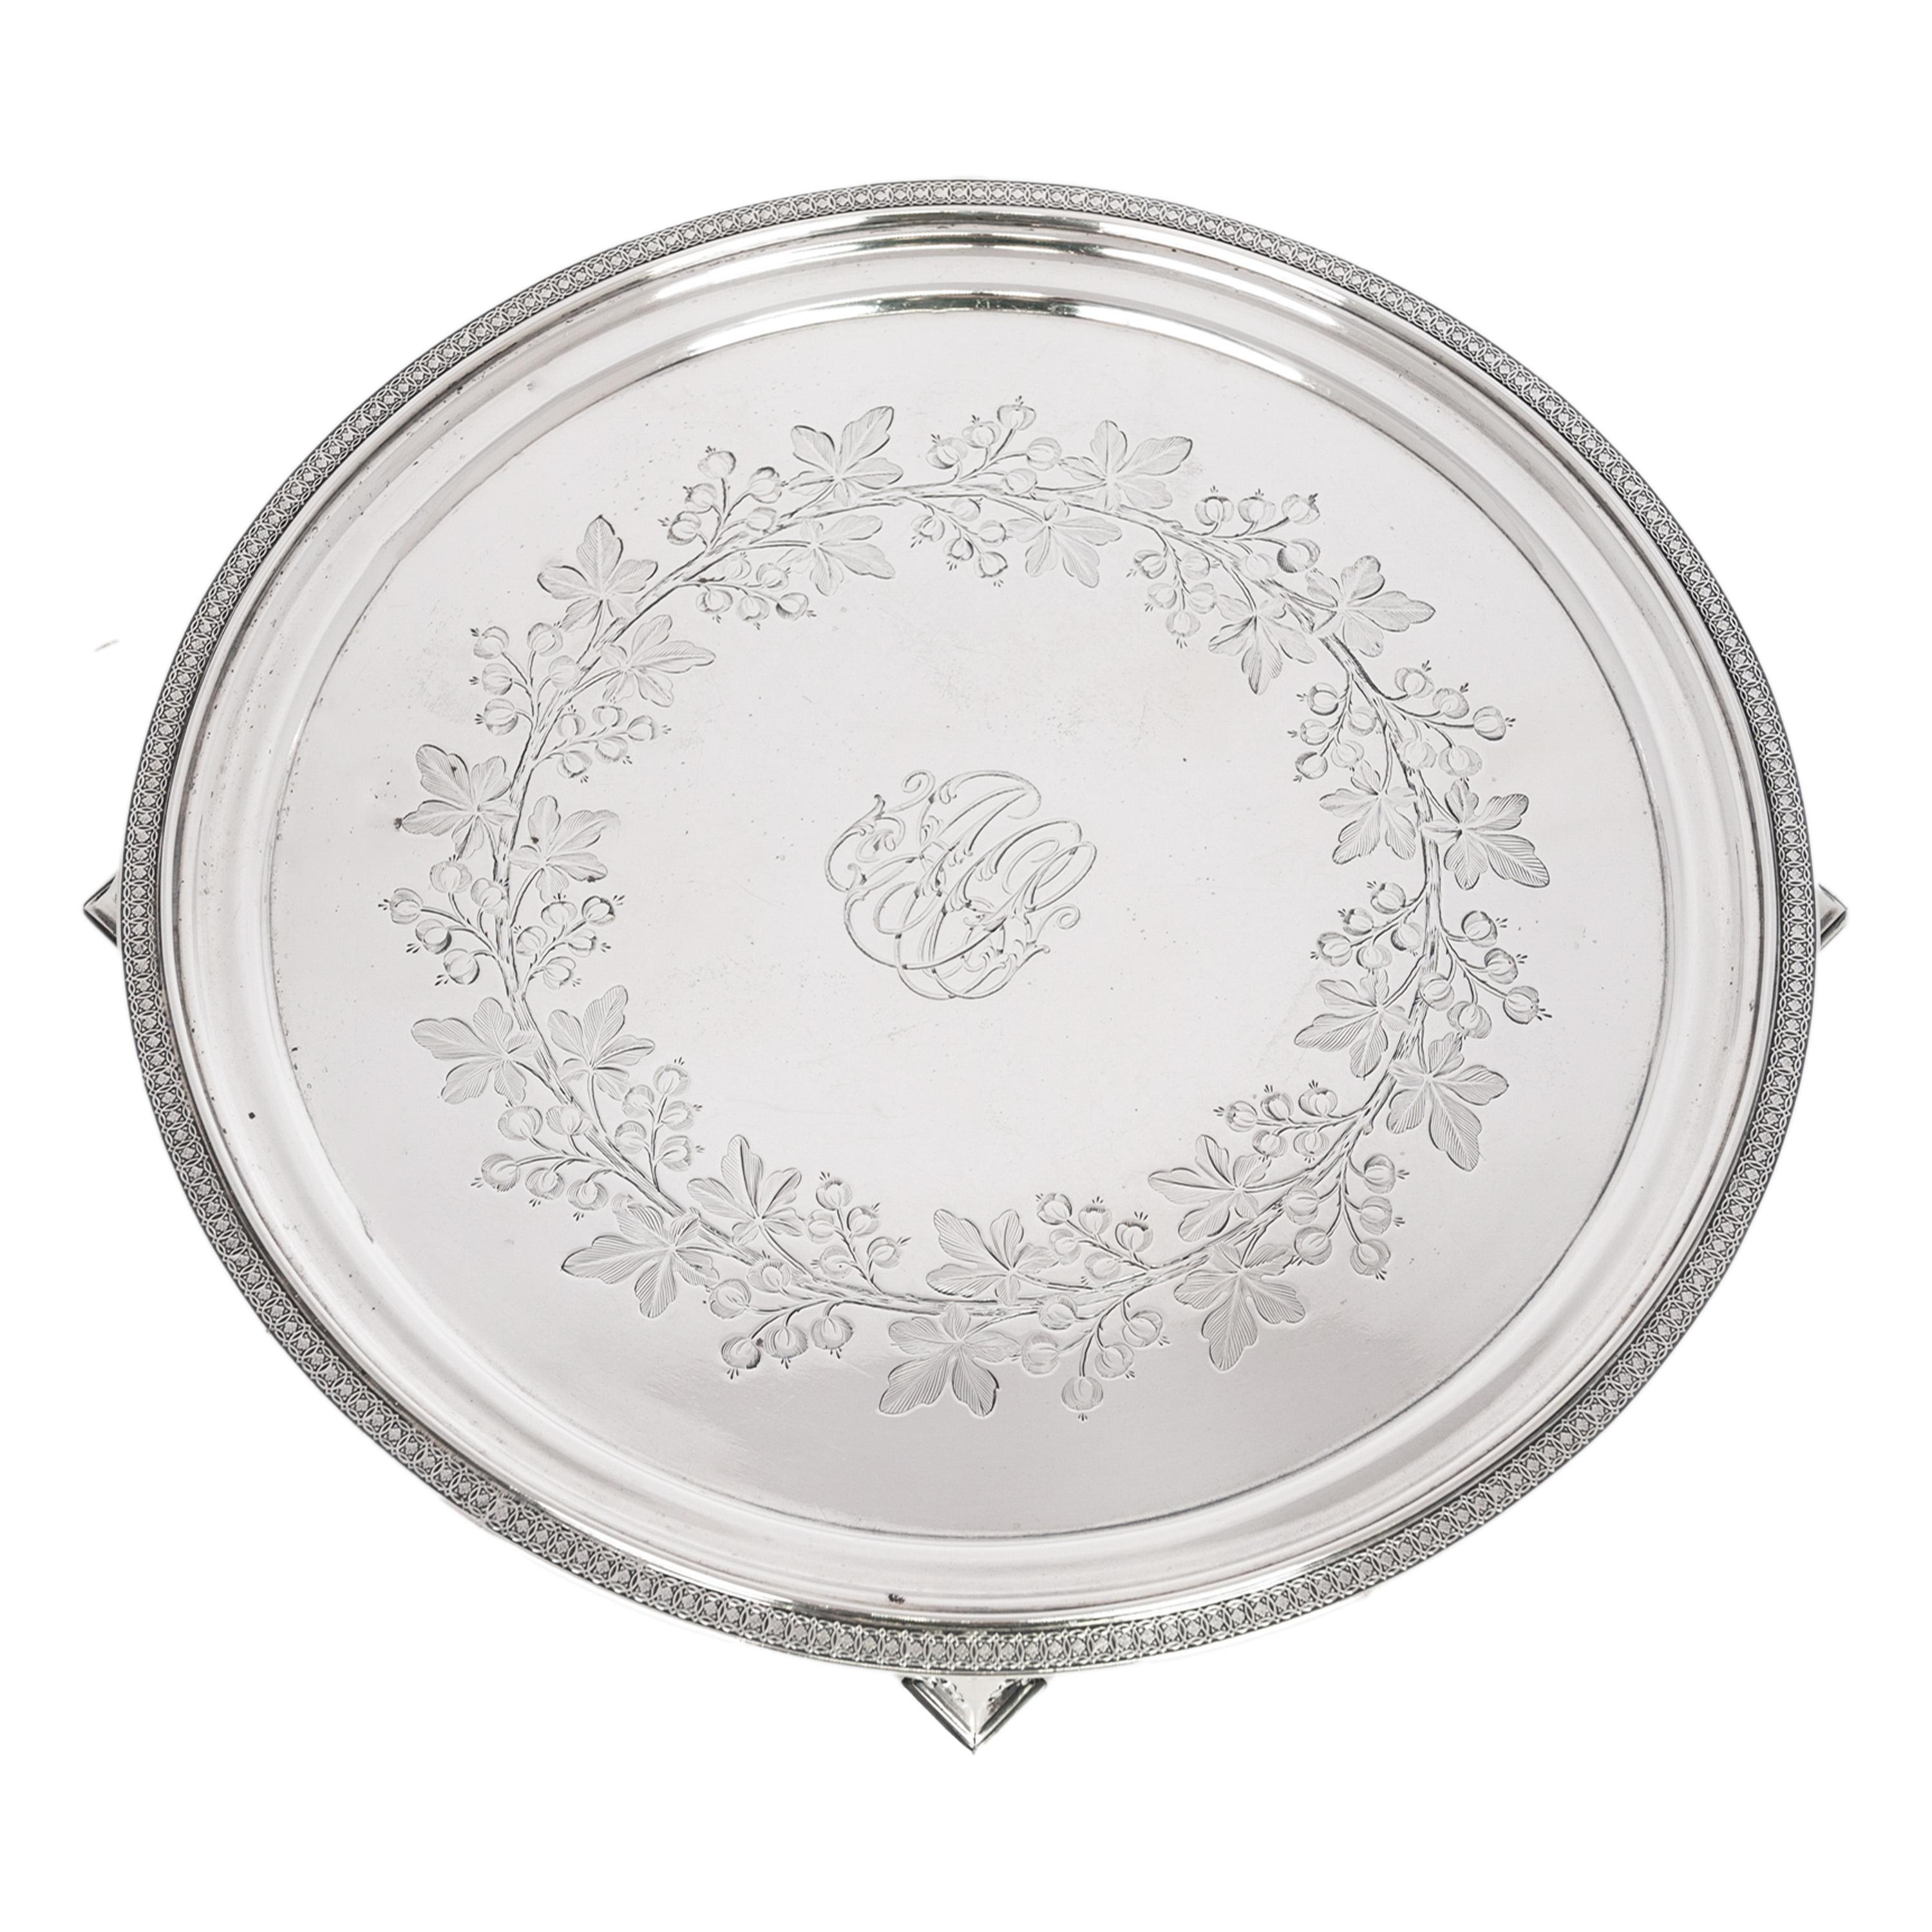 American Antique Engraved Sterling Silver Tiffany & Co Footed Salver Tray New York 1870 For Sale